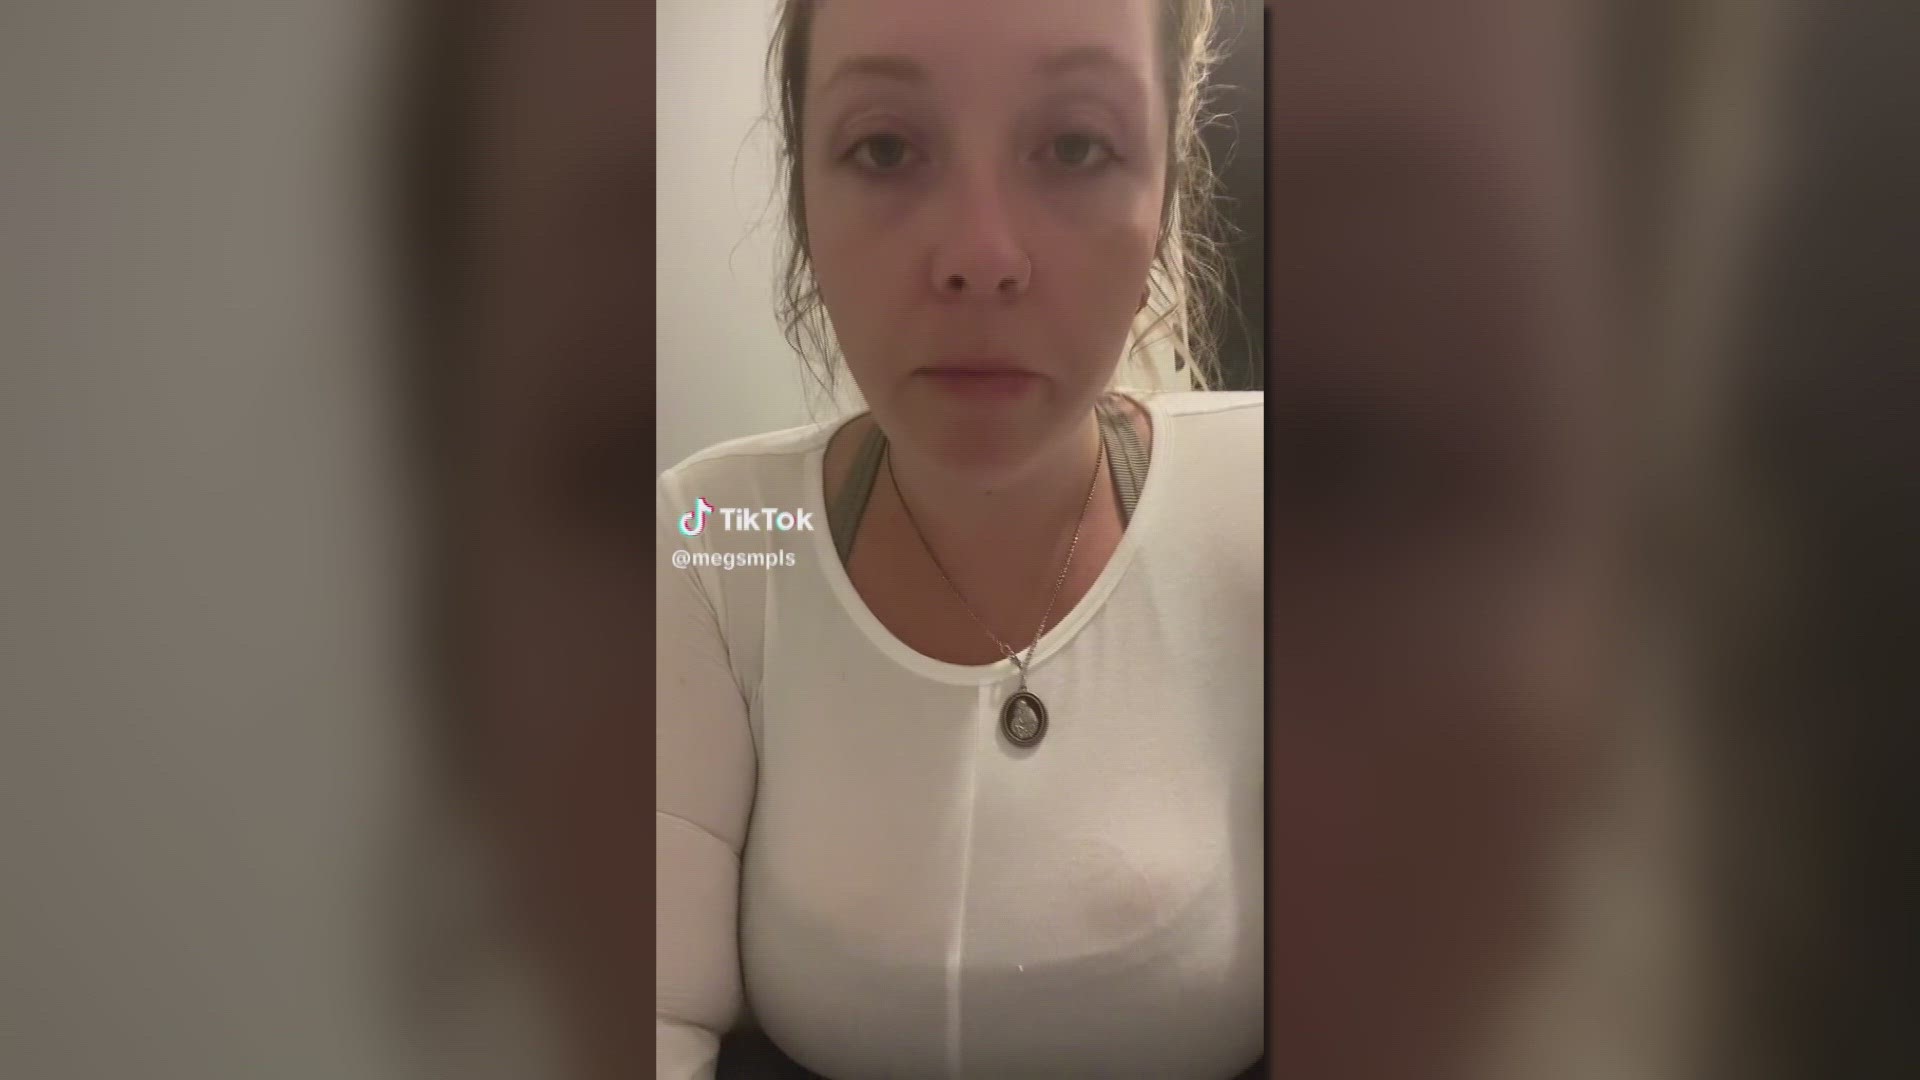 Megan Kingsbury, the sister of missing Winona woman Madeline Kingsbury, announced in arrest in the case on TikTok Wednesday evening.